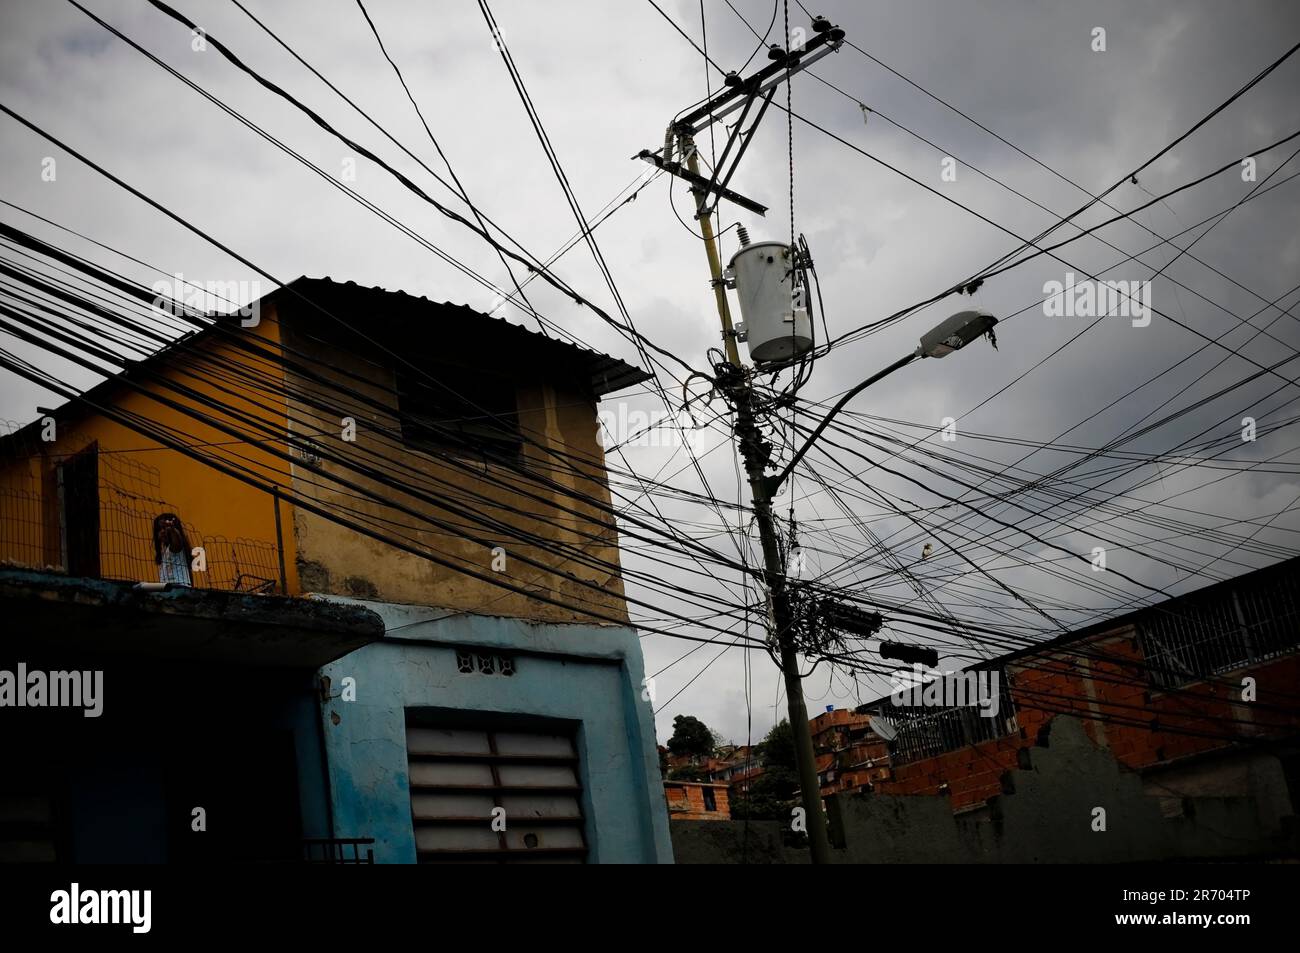 Tangled powerlines in Petare, a slum in Caracas, Venezuela  represent the energy crises causing blackouts across the country. Stock Photo